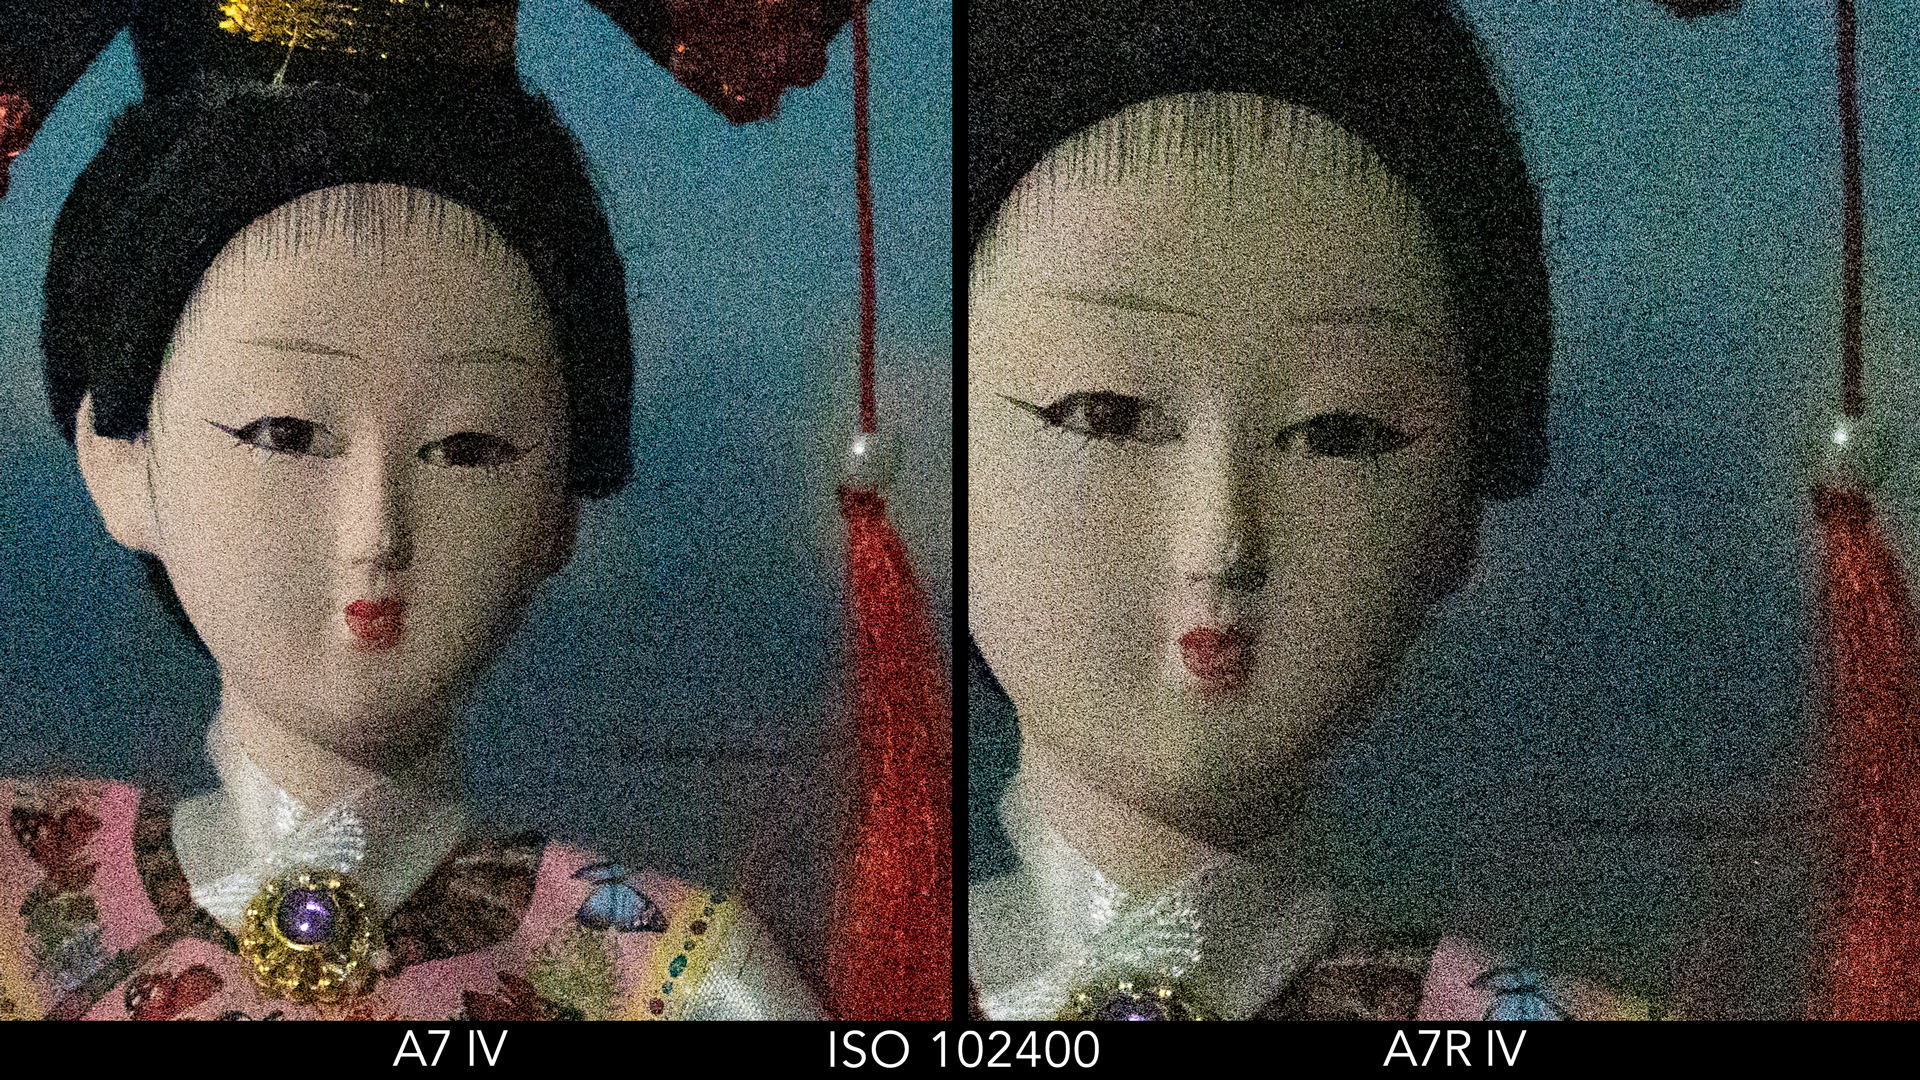 Side by side crop showing the quality at ISO 102400 for the A7 IV and A7R IV